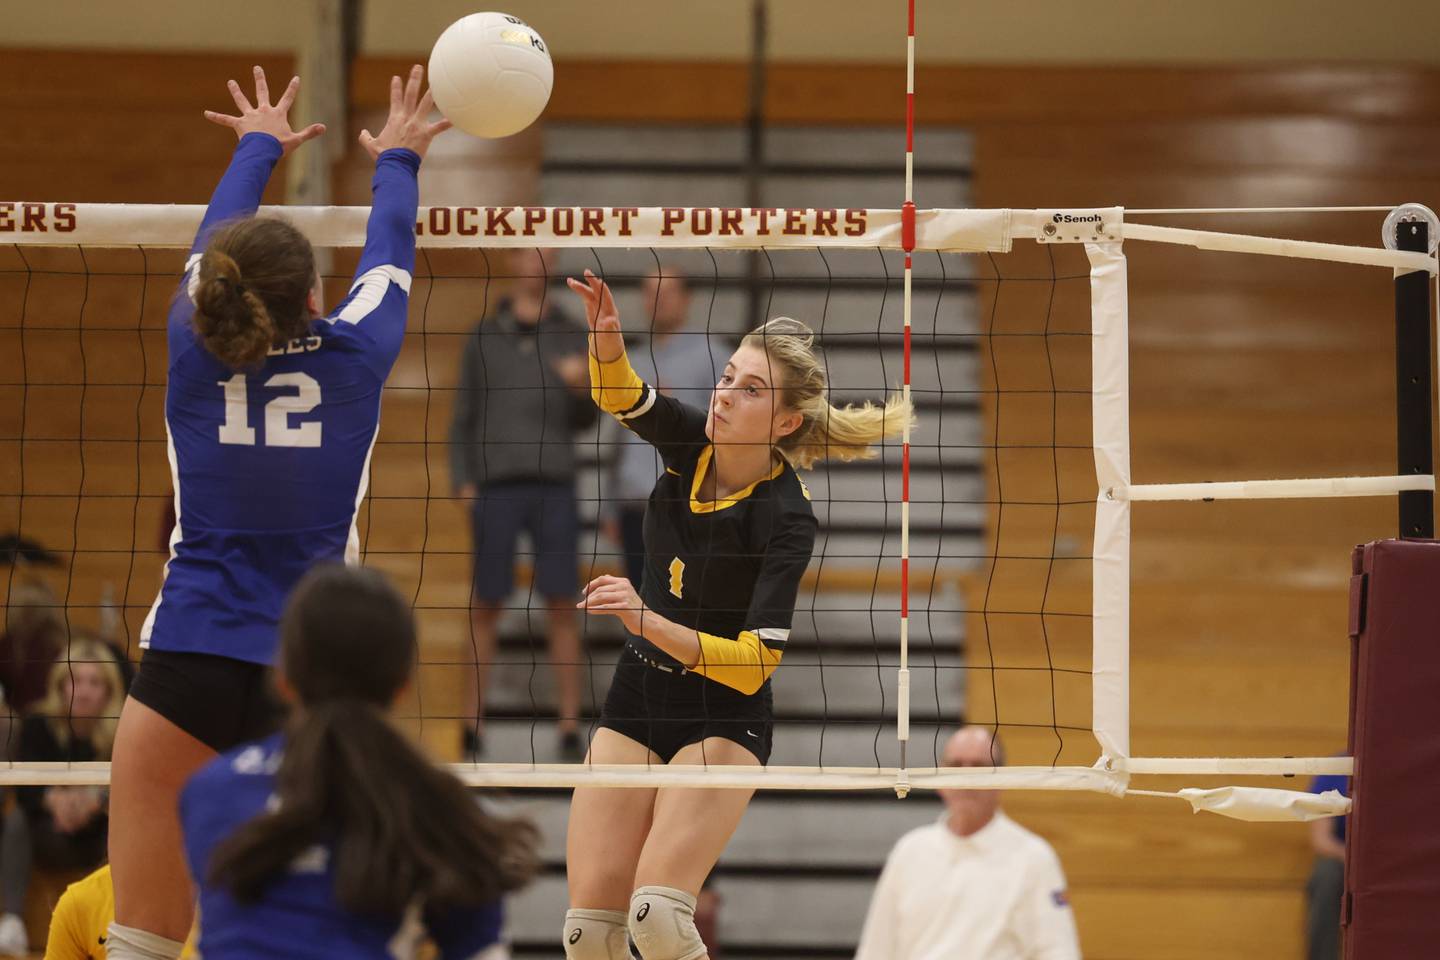 Joliet West’s Ava Grevengoed hits a shot past the defense of Sandburg in the in the Class 4A Lockport Sectional title match on Wednesday.